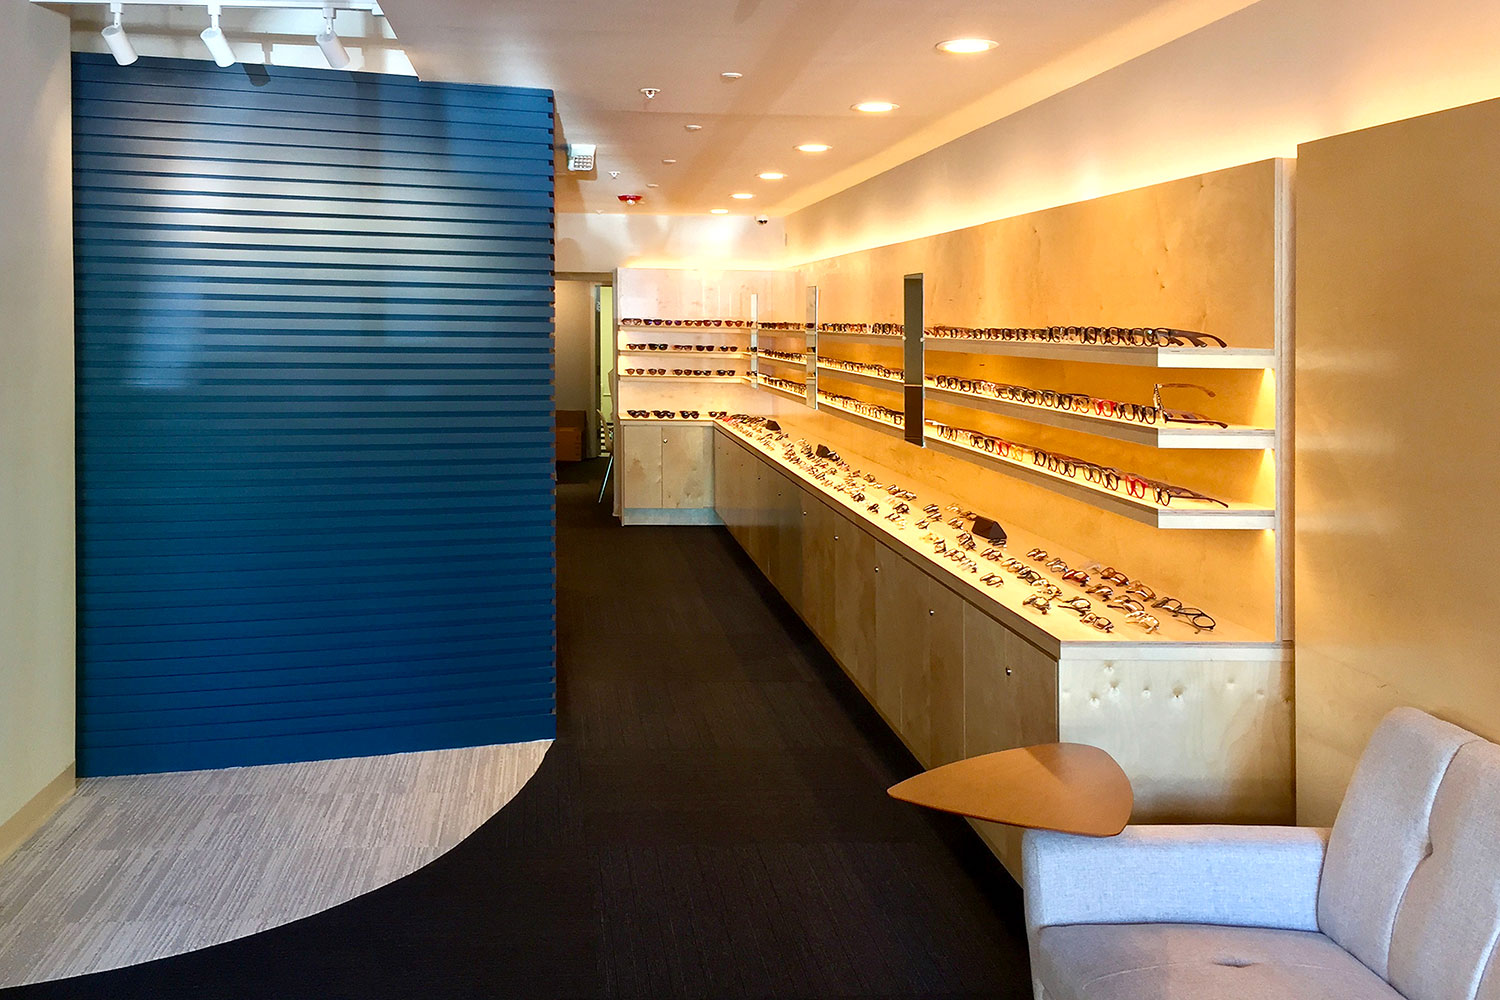 Store selling eyeglasses in Hayes Valley. Interior view. Lighted display racks and countertops with merchandise.